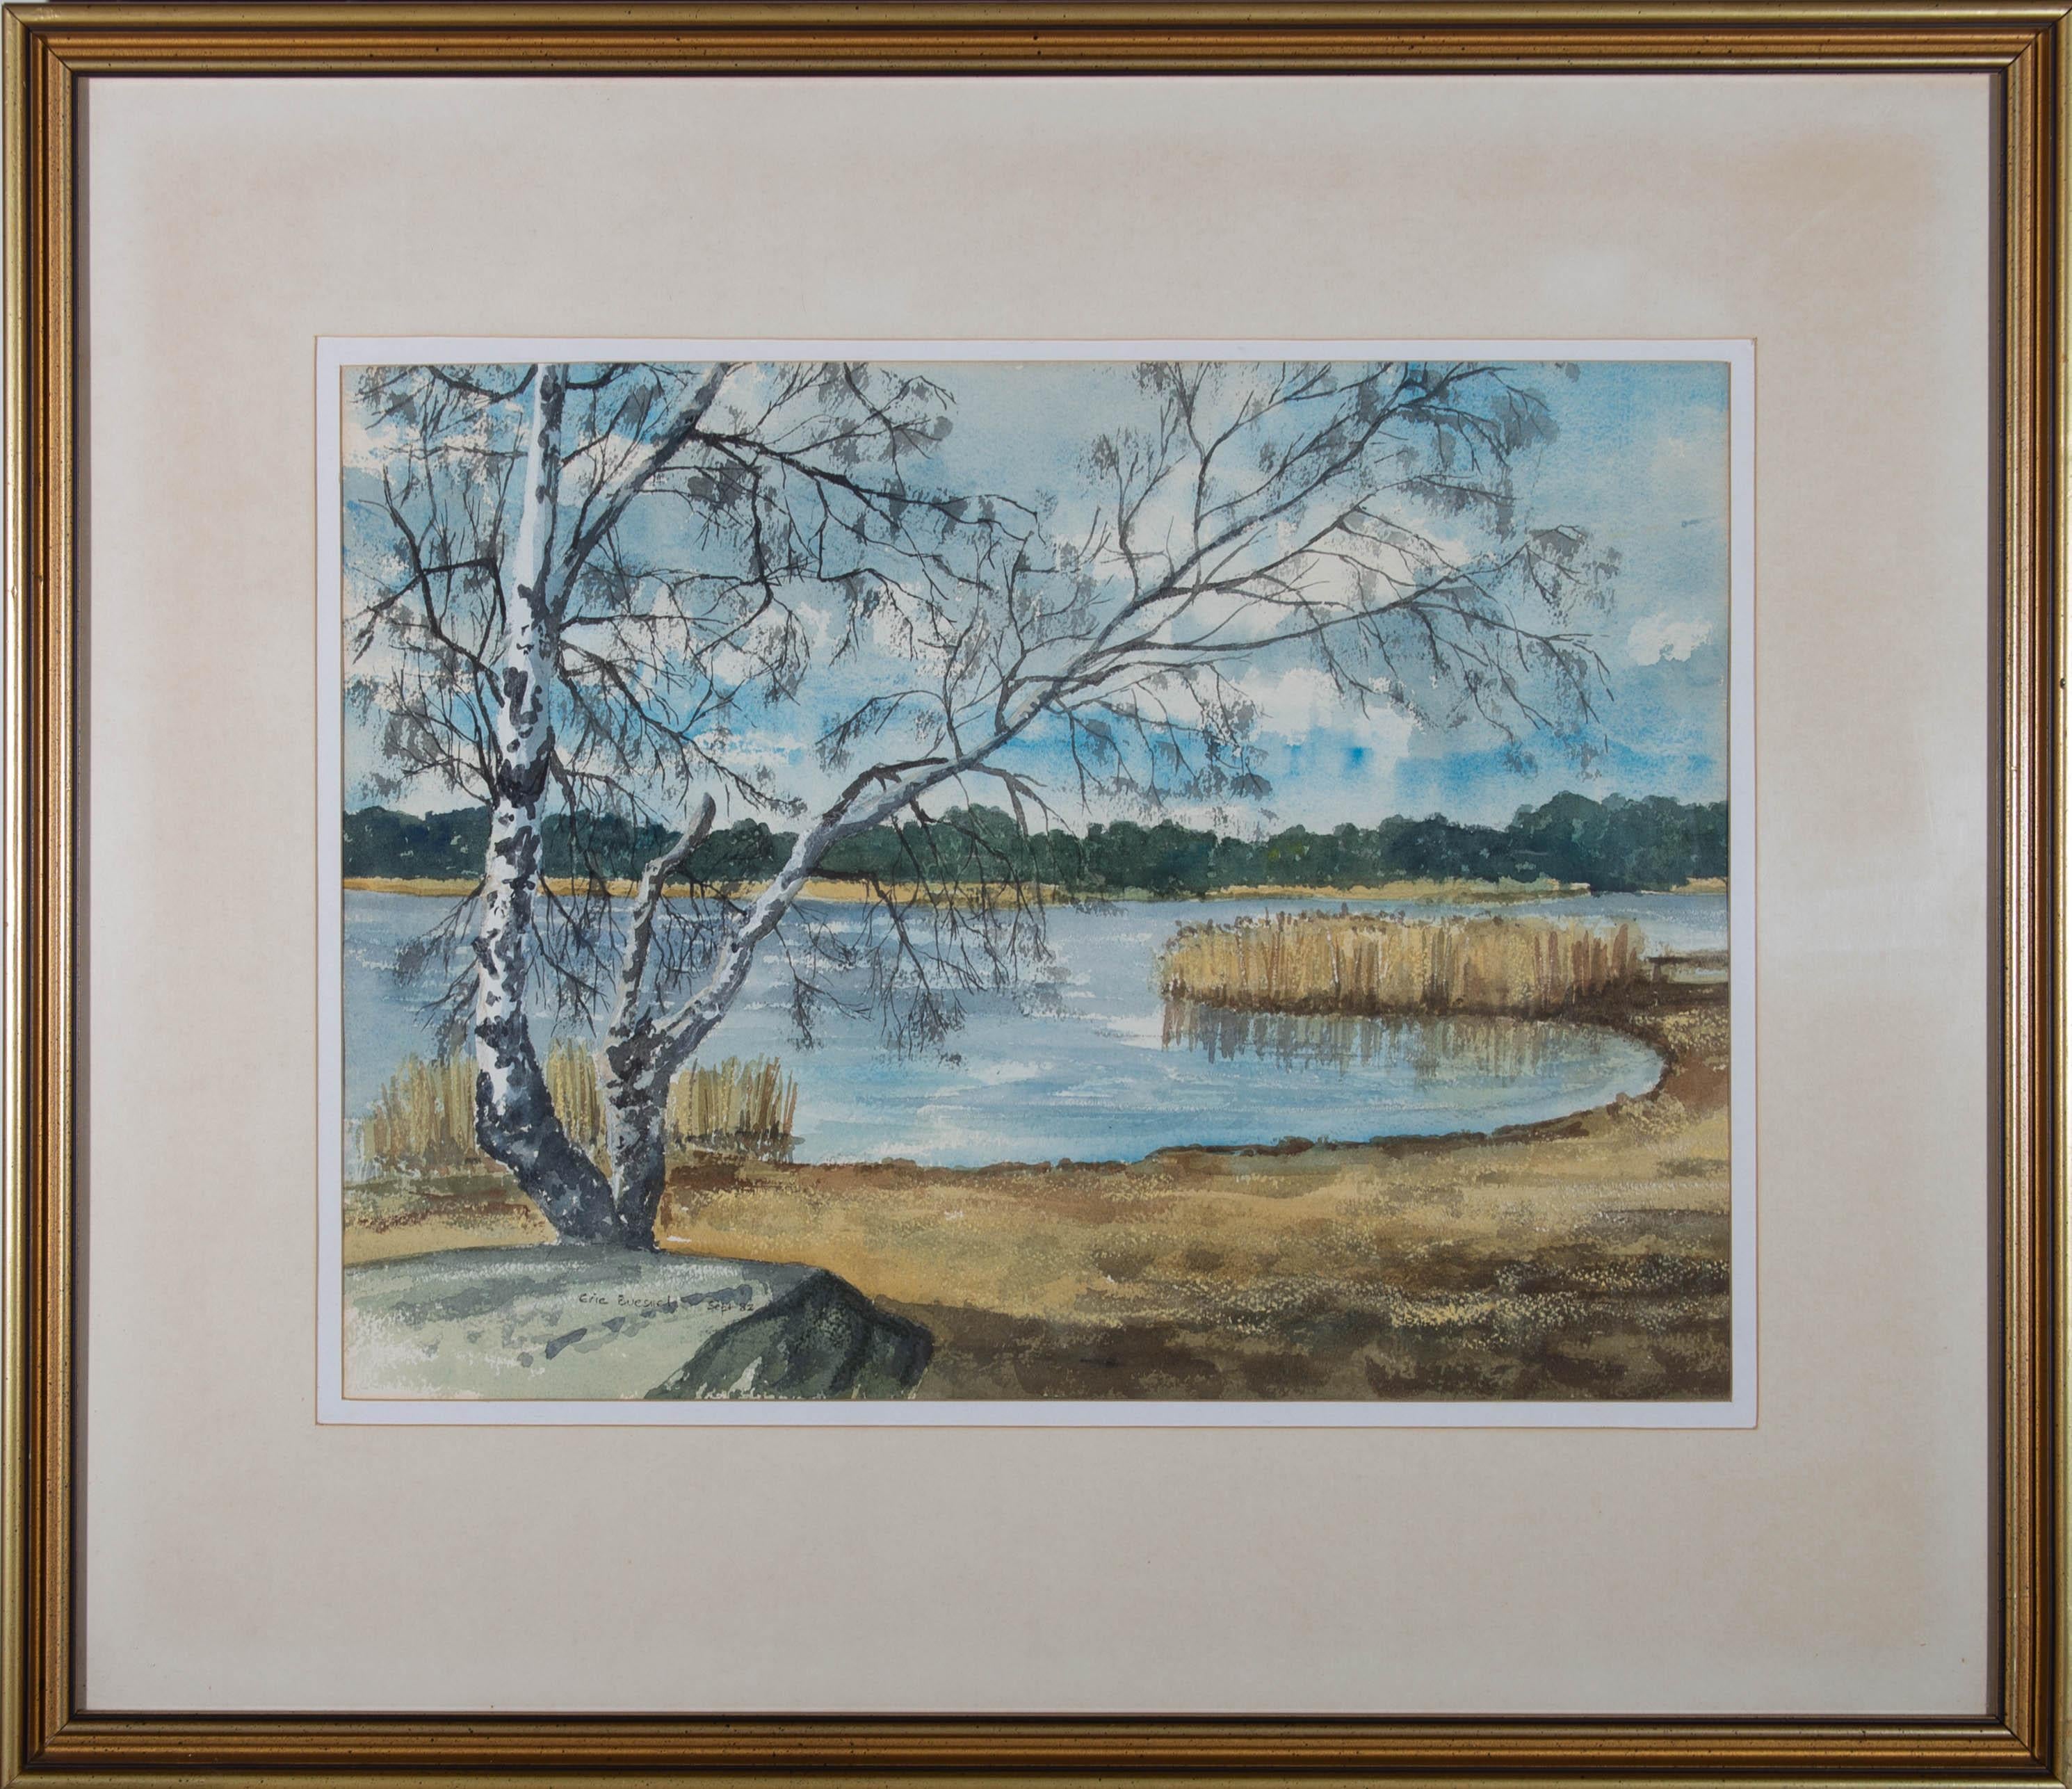 A tranquil scene depicting a birch tree before a lake. Signed and dated to the lower left. On wove.

